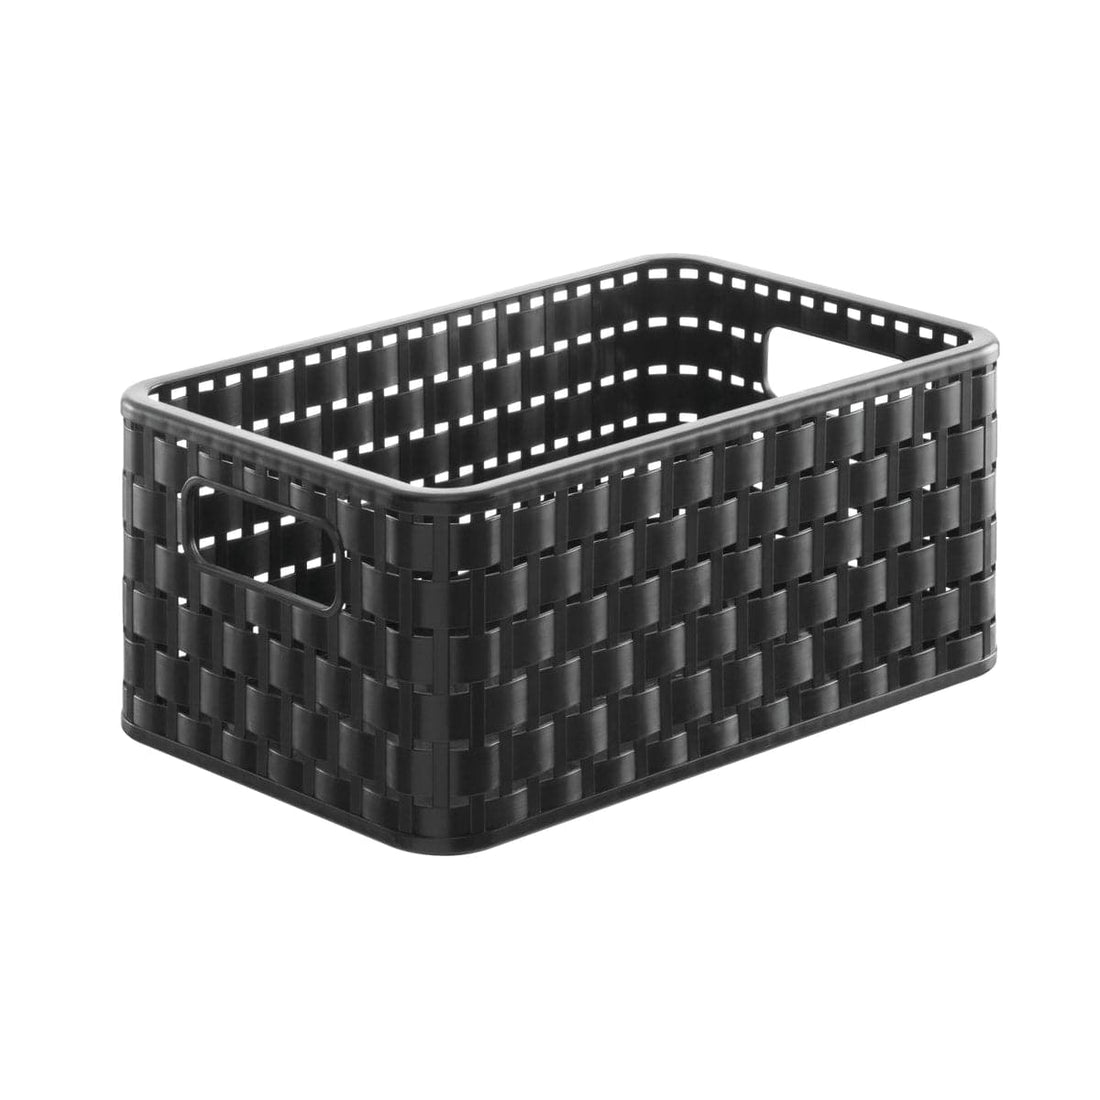 COUNTRY BASKET A5 28X18,5X12,6 CM ANTHRACITE - best price from Maltashopper.com BR410005867